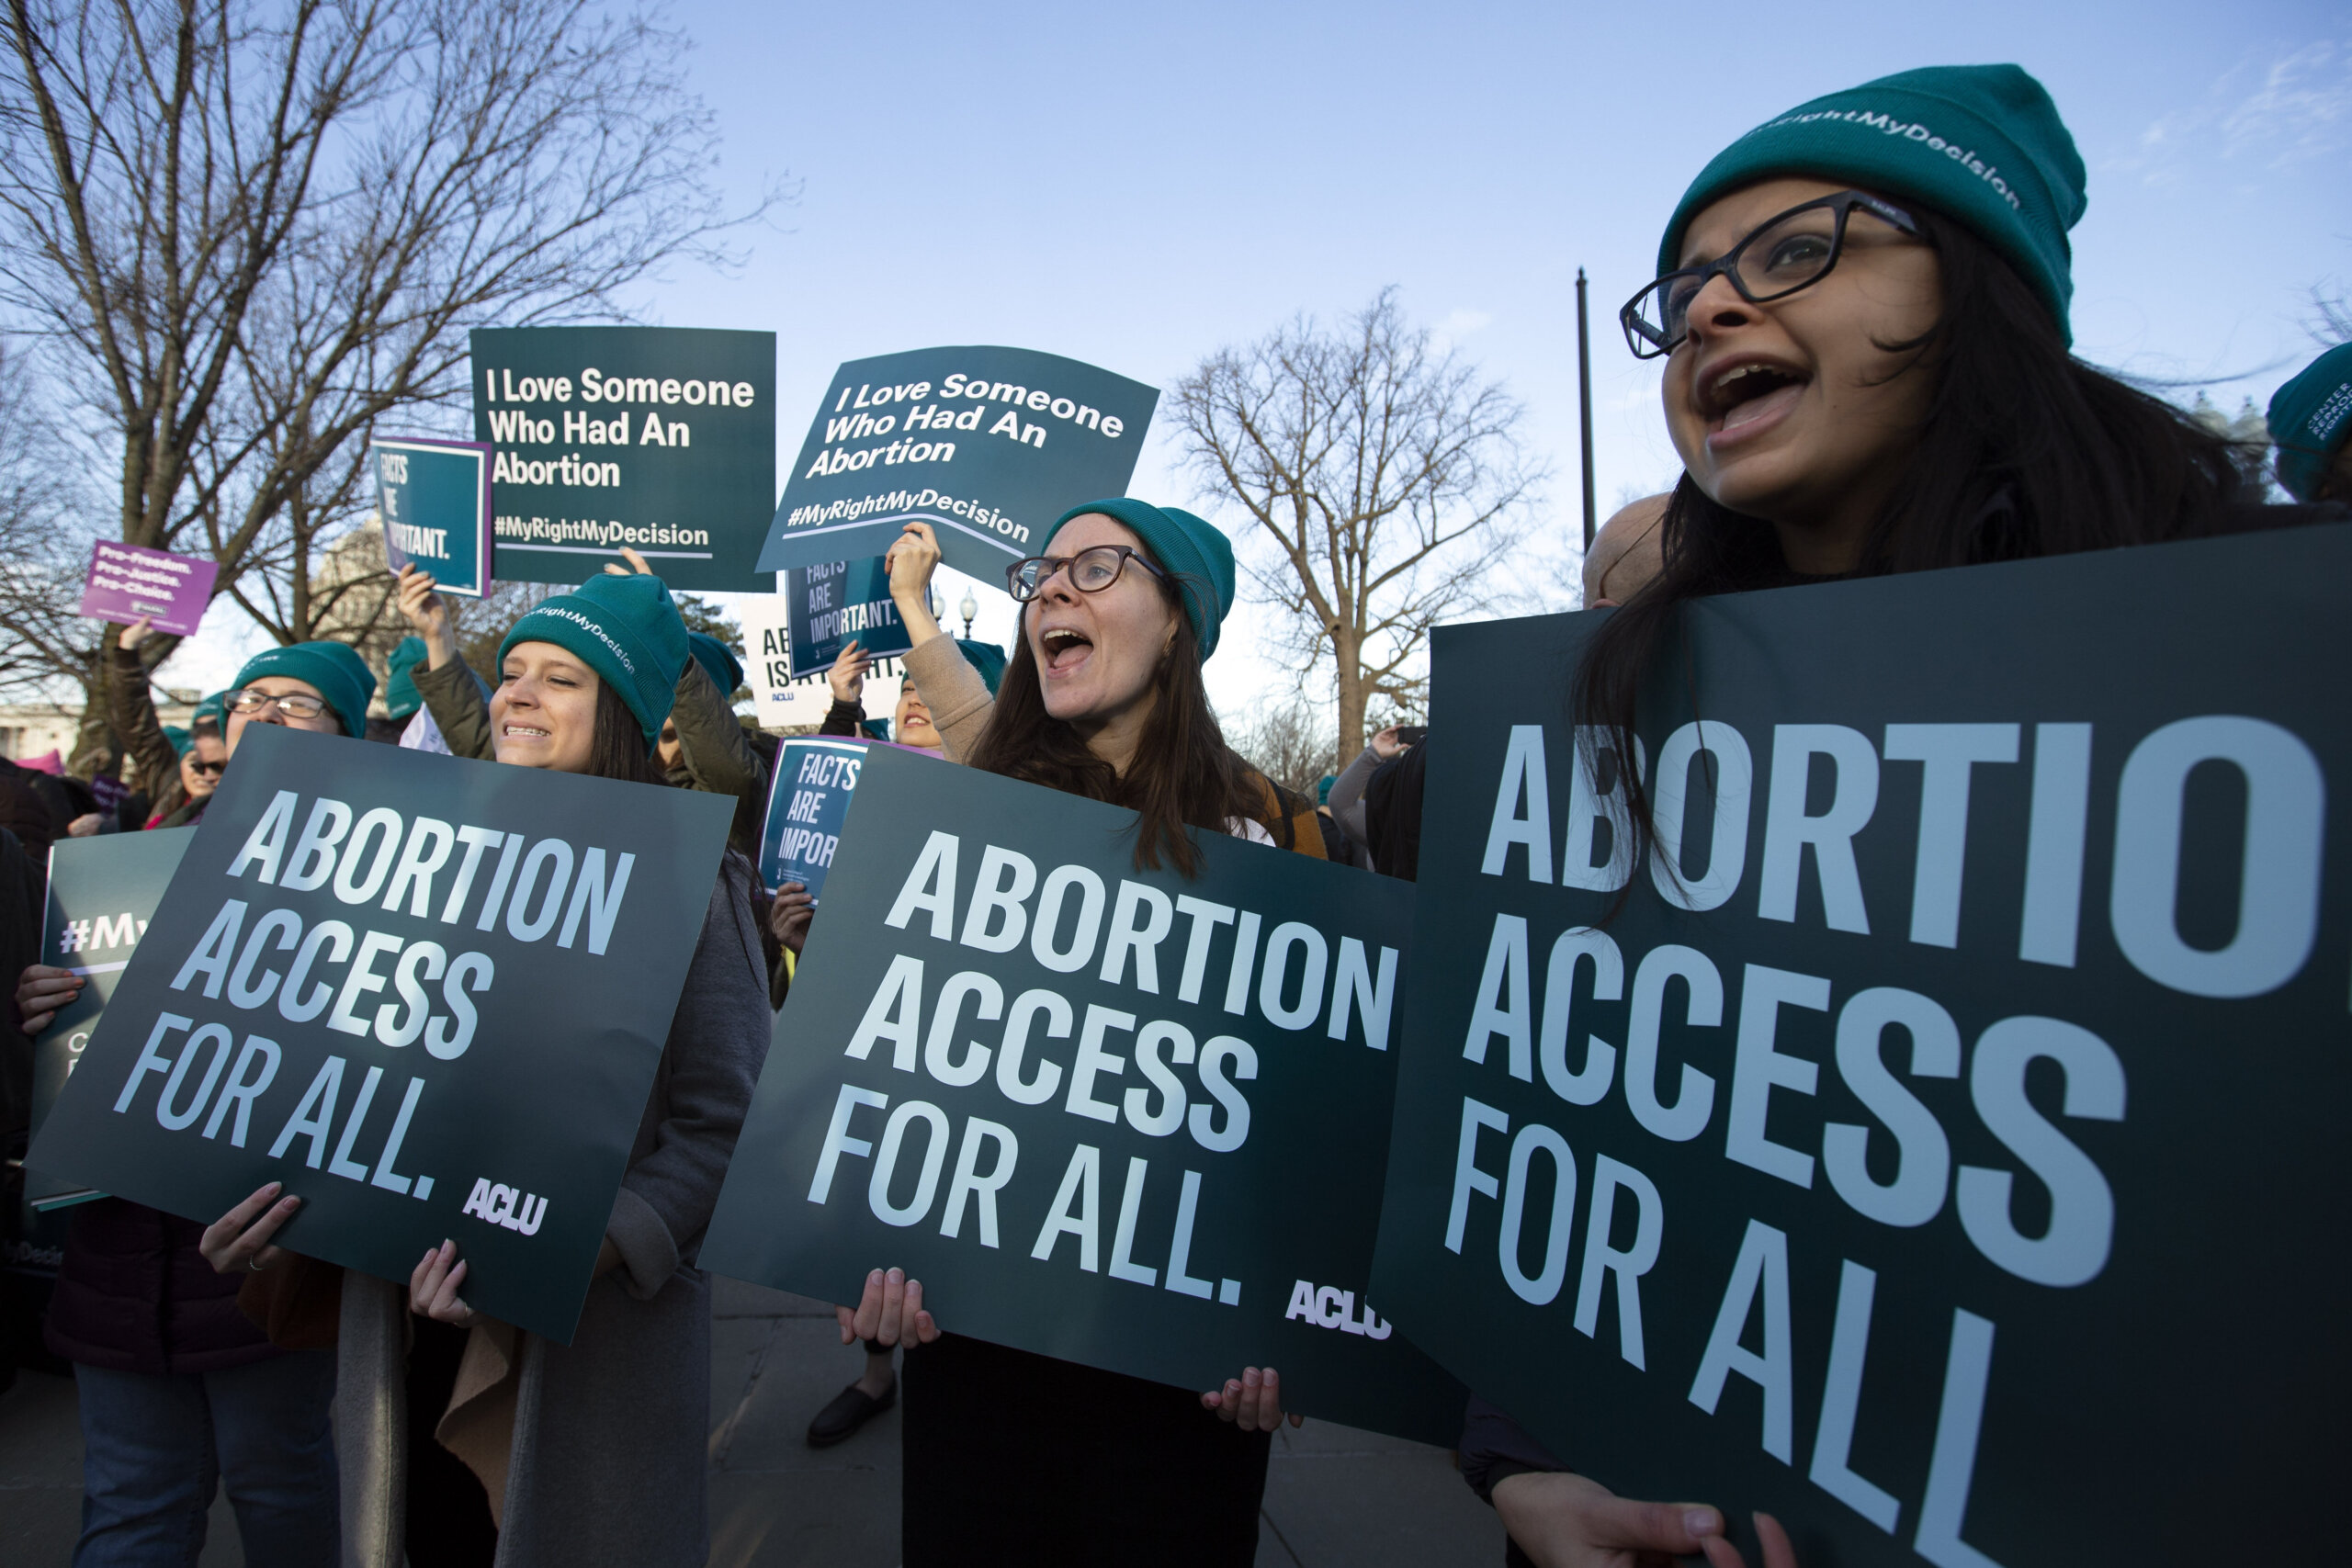 ACLU of Virginia plans to spend over $1M on abortion rights messaging